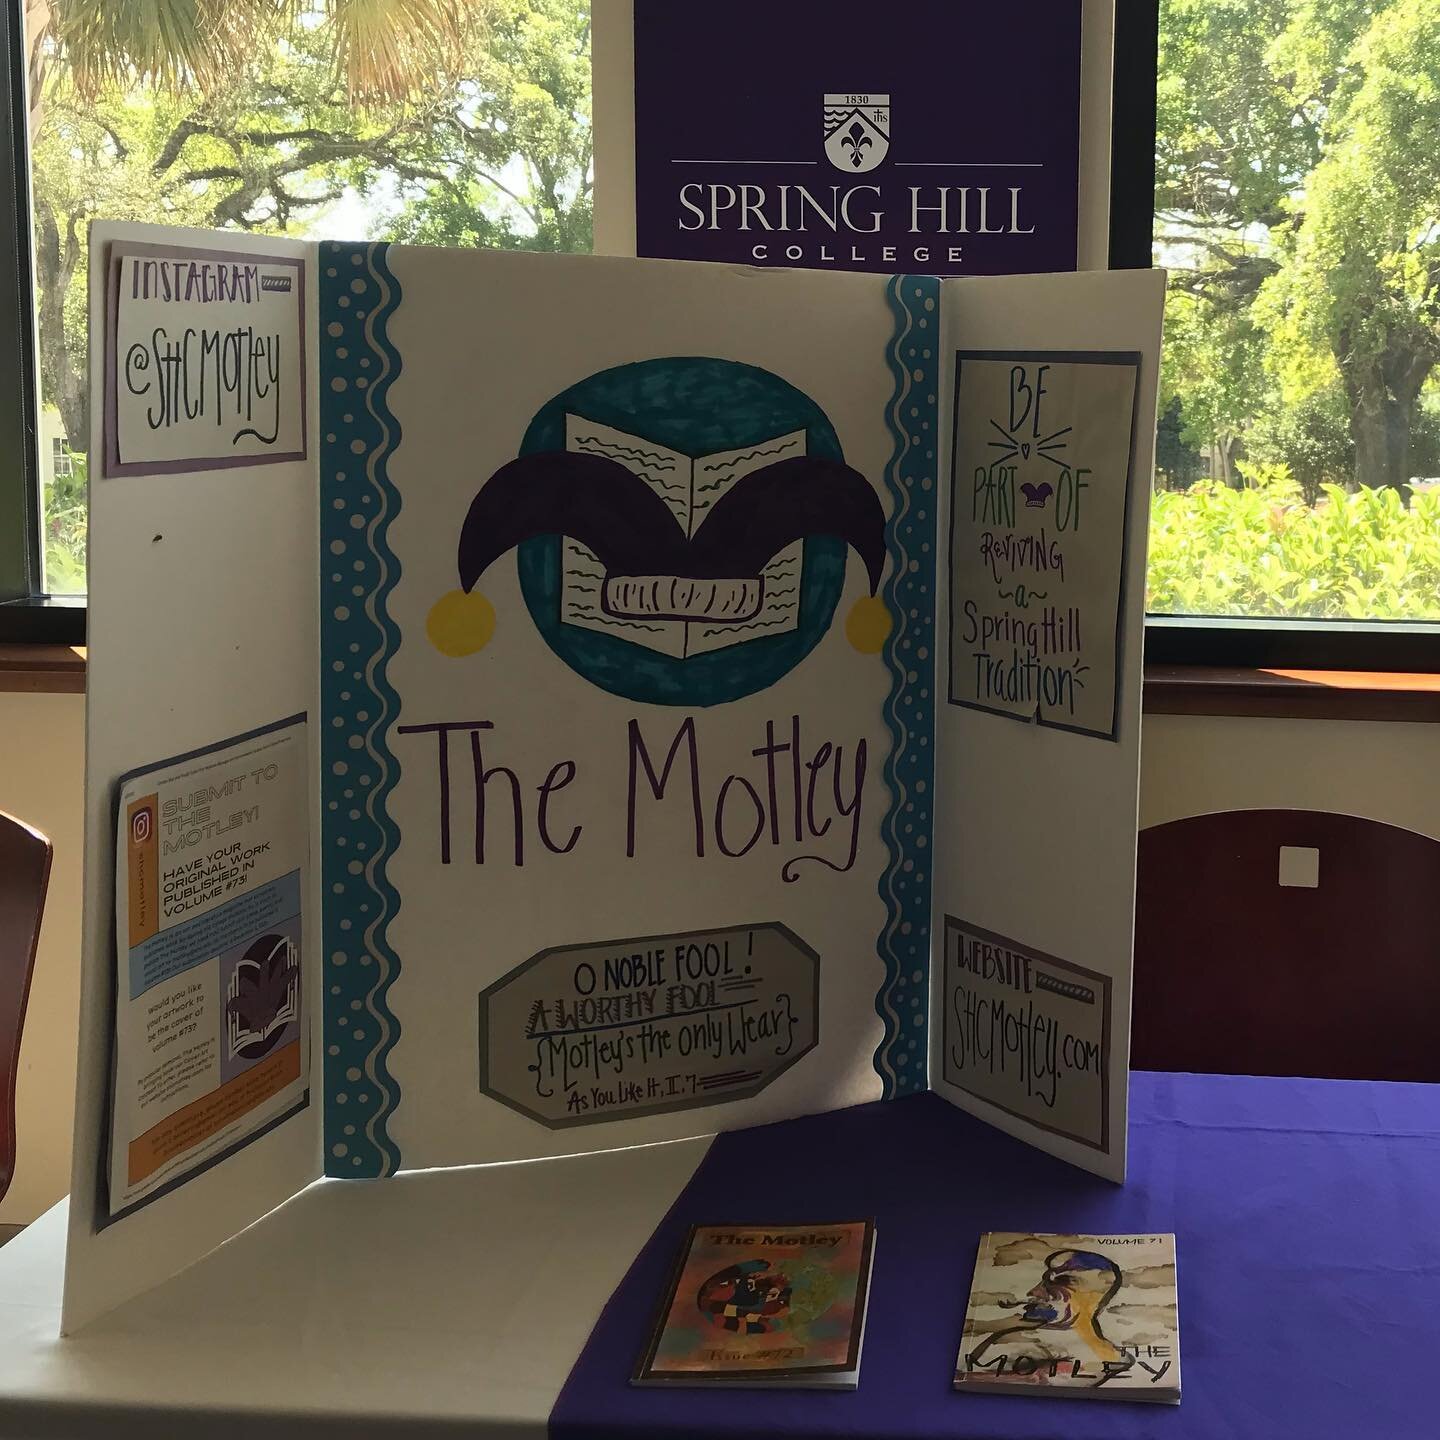 Are you interested in becoming a part of the Motley Crew next year? Or would you like to be published in Spring Hill&rsquo;s art and literature magazine?

The Motley is at Welcome to the Hill!!! Current and incoming Badgers, come and learn about one 